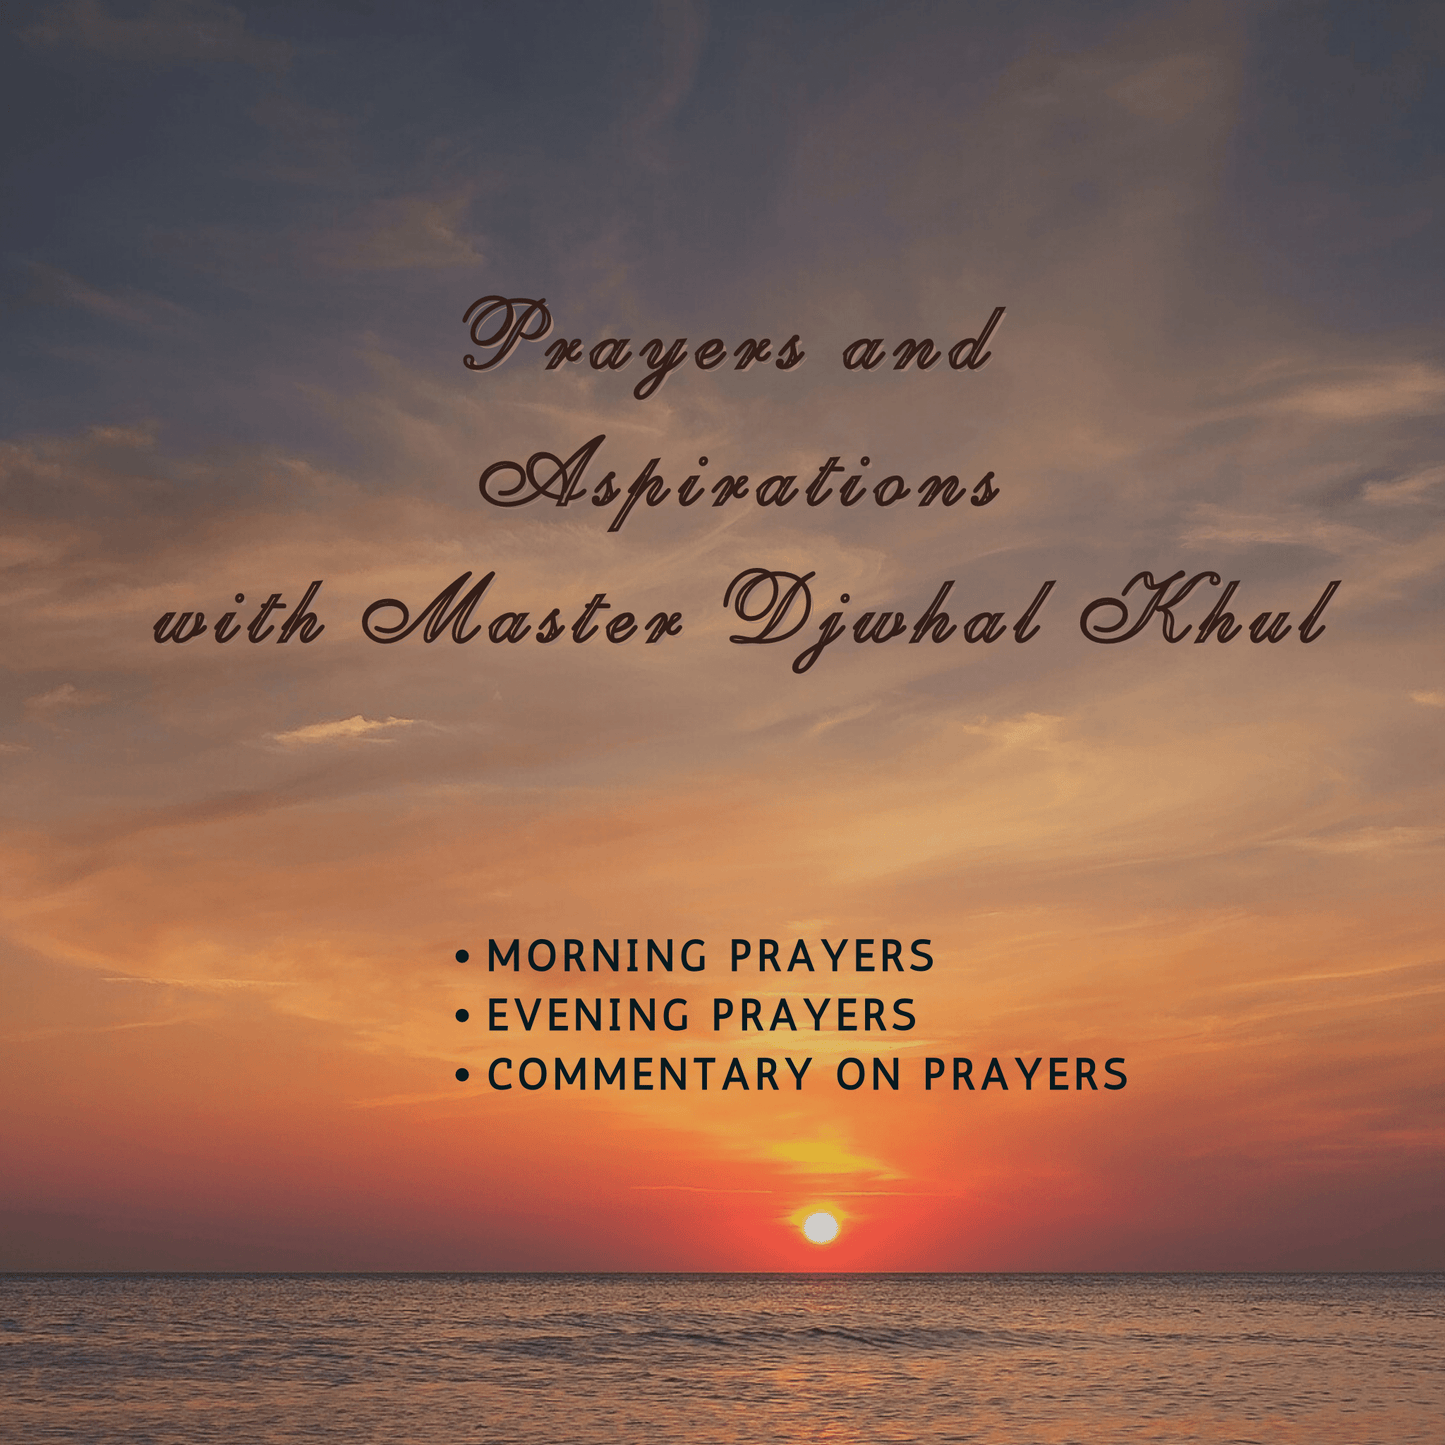 Prayers and Aspirations with Master Djwhal Khul